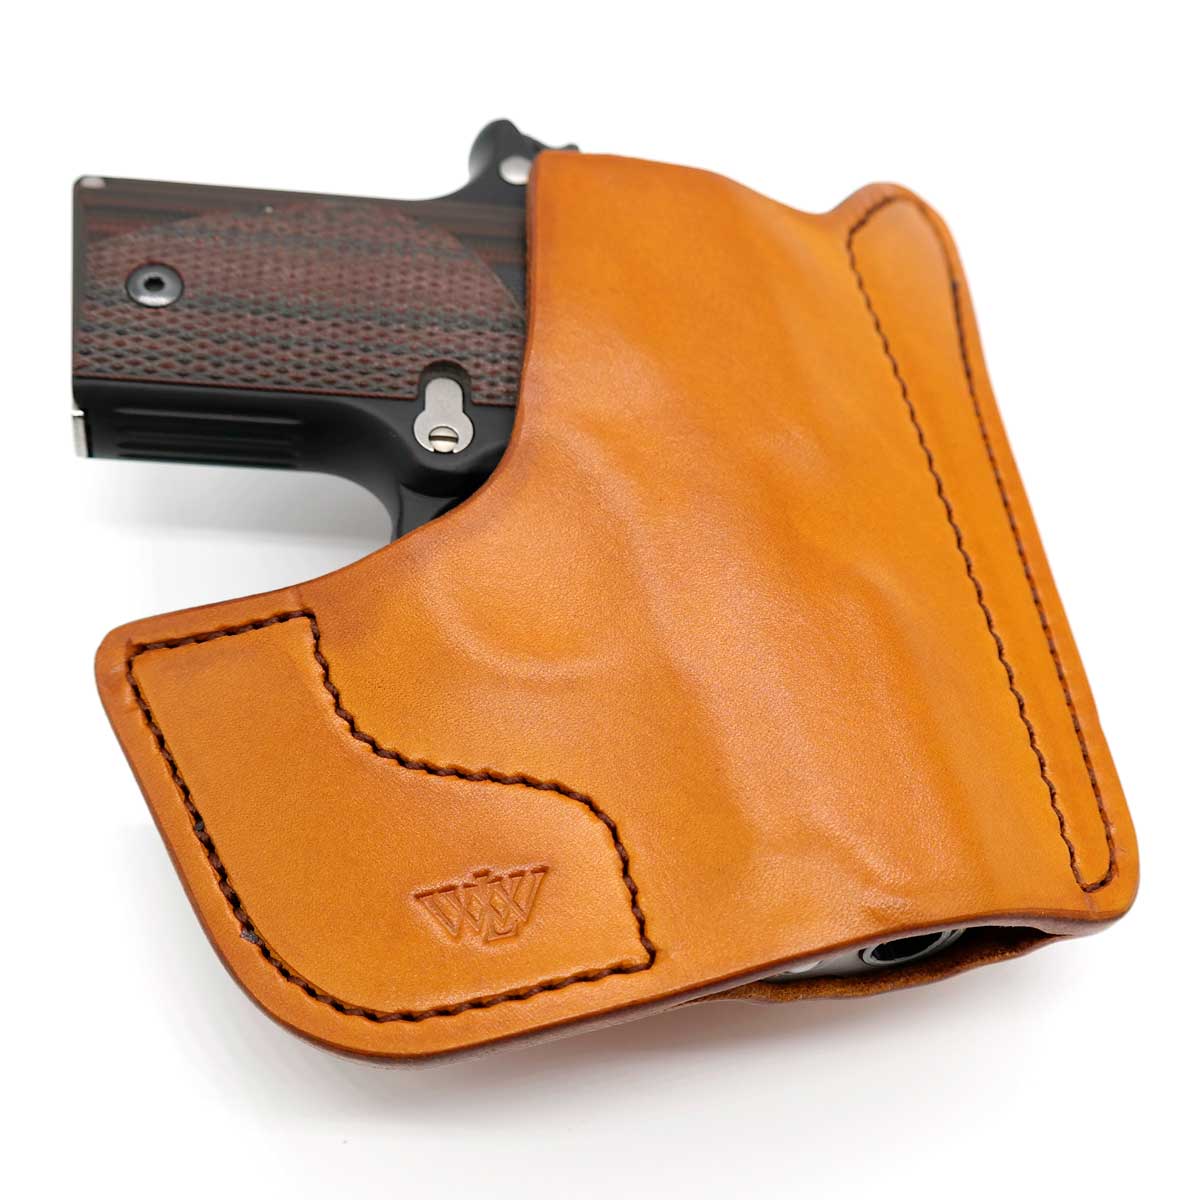 BANDICOOT_STYLE Concealed Carry Gun Holsters